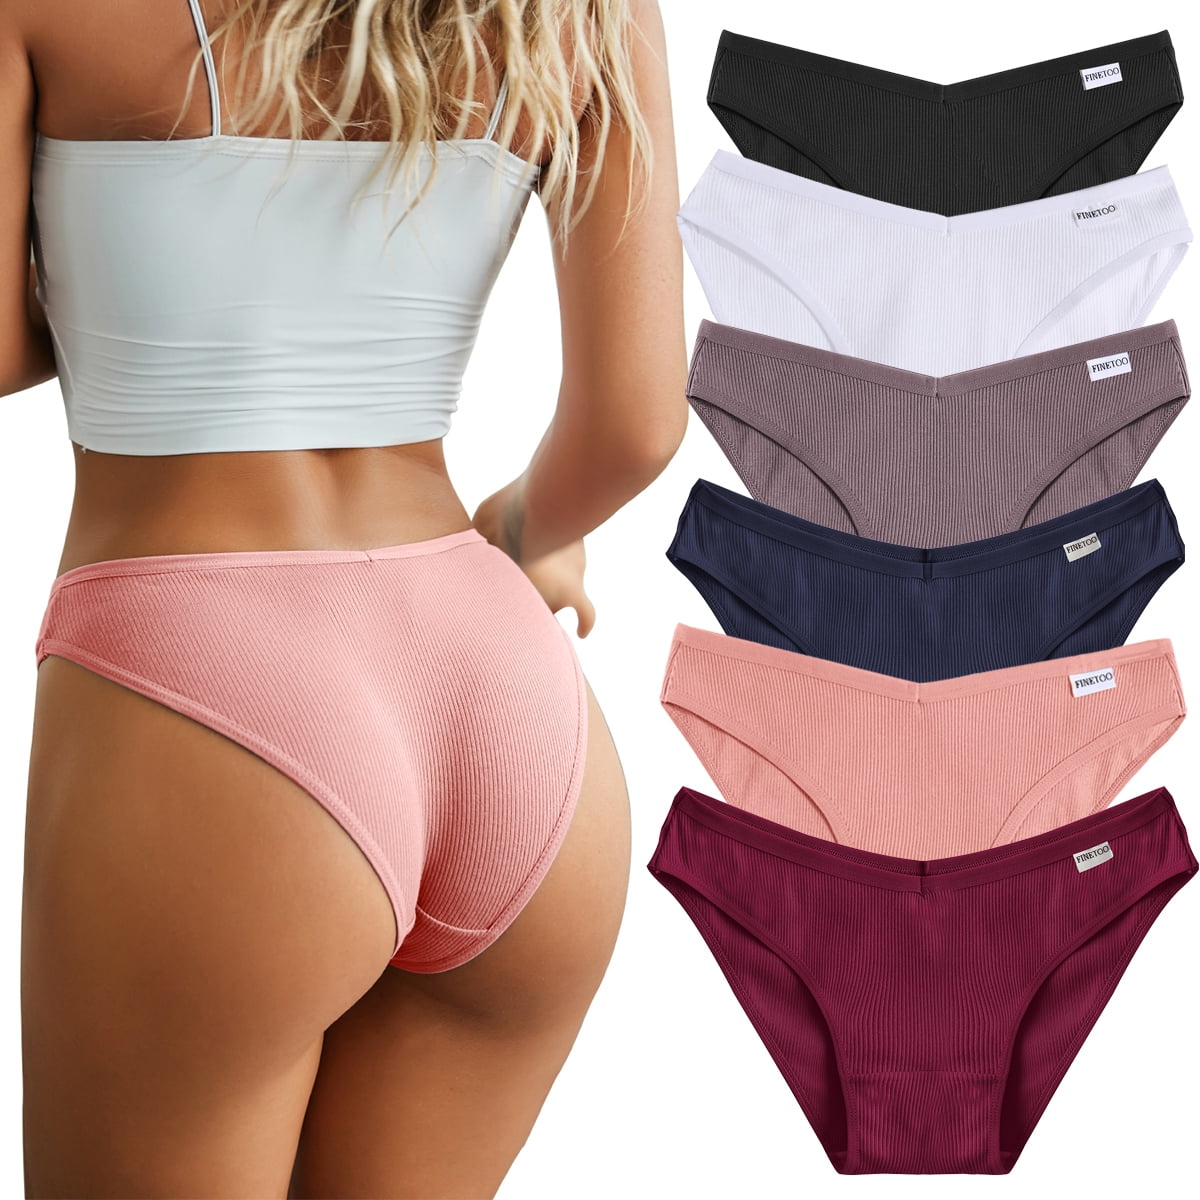 FINETOO 6 Pack Cotton Underwear For Women Cute Low Rise Bikini Rib Cheeky  Panties V-shaped waistband Hipster Lingerie S-XL